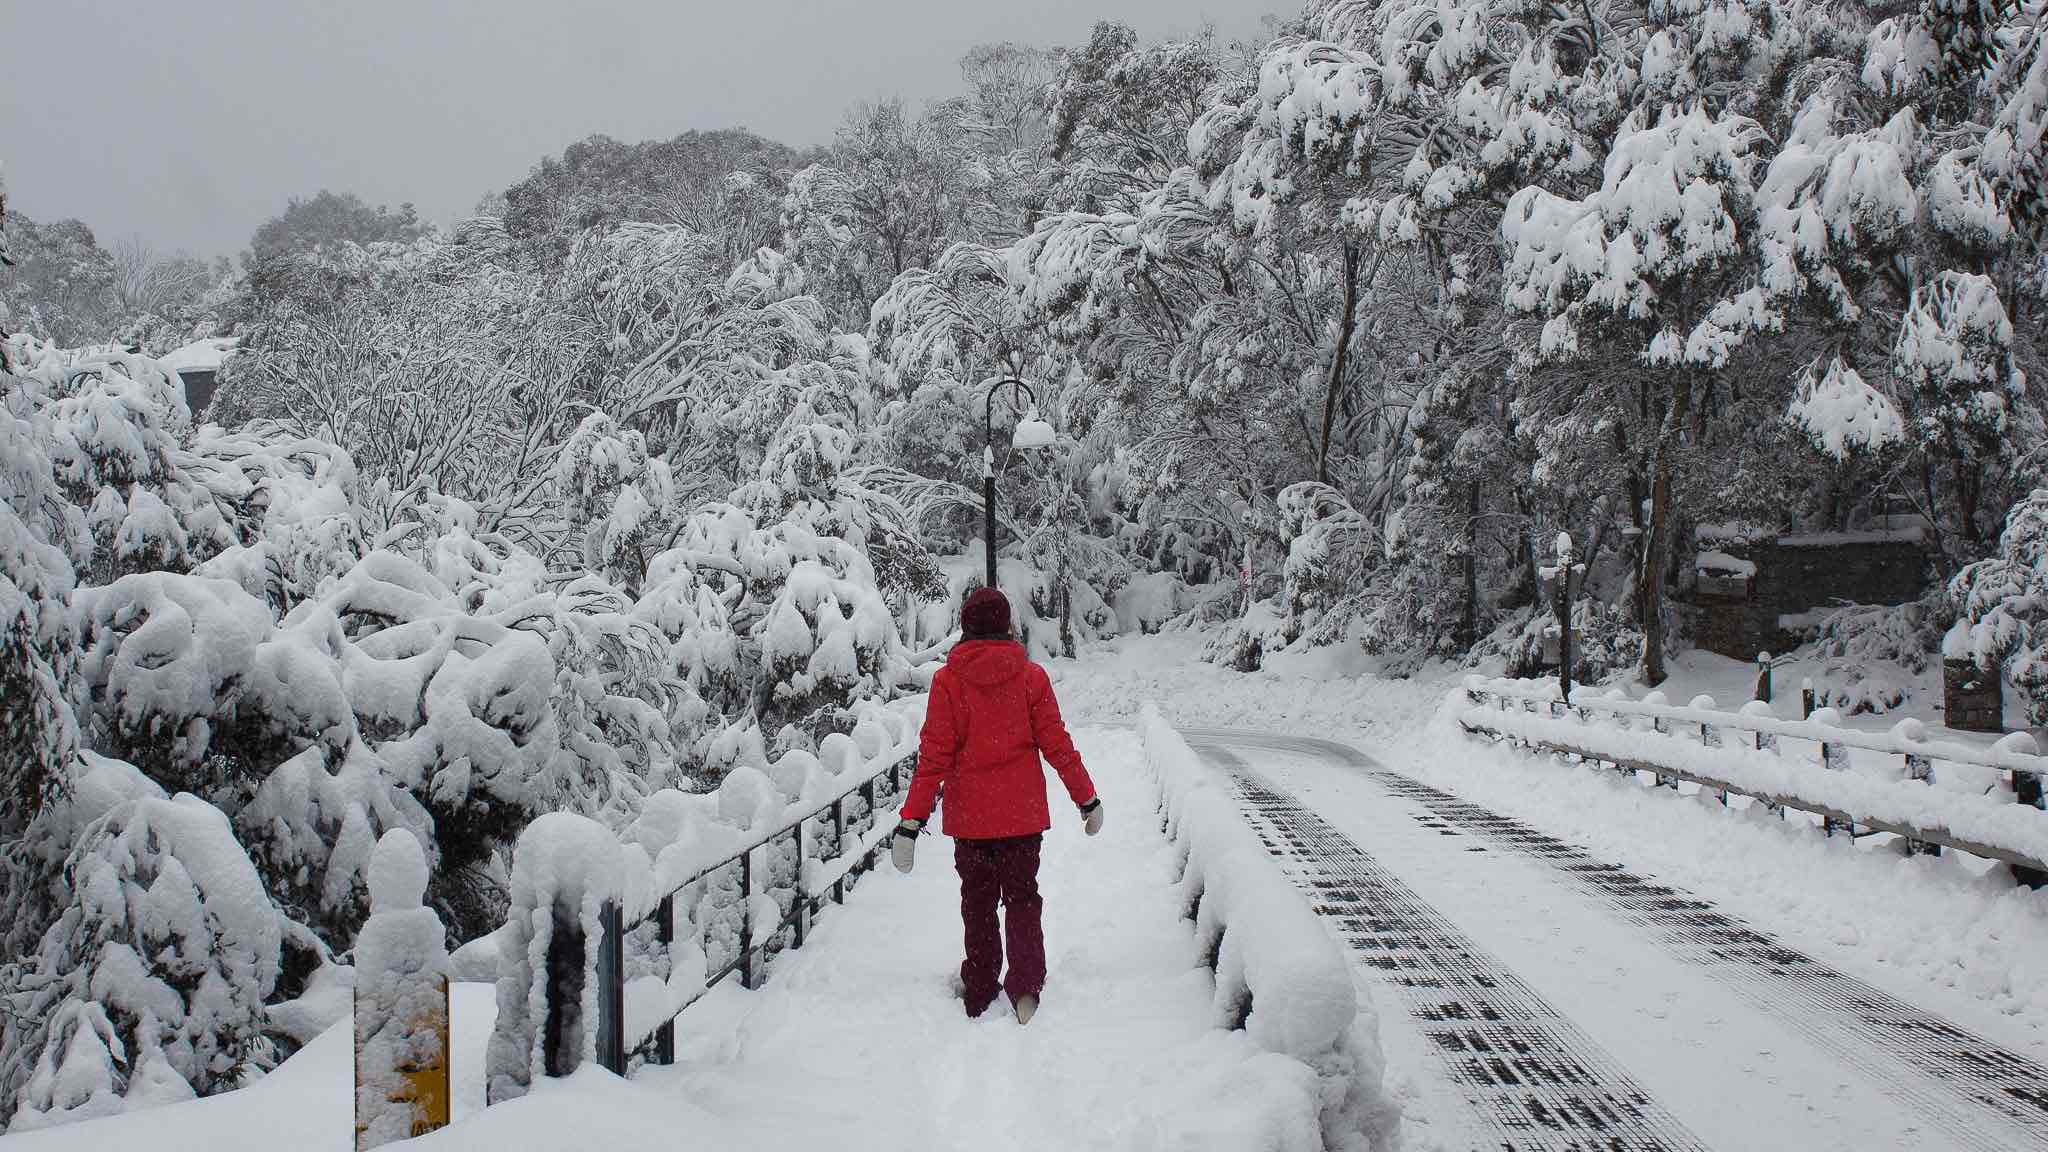 A Weekender's Guide to the Snowy Mountains During Snowtunes